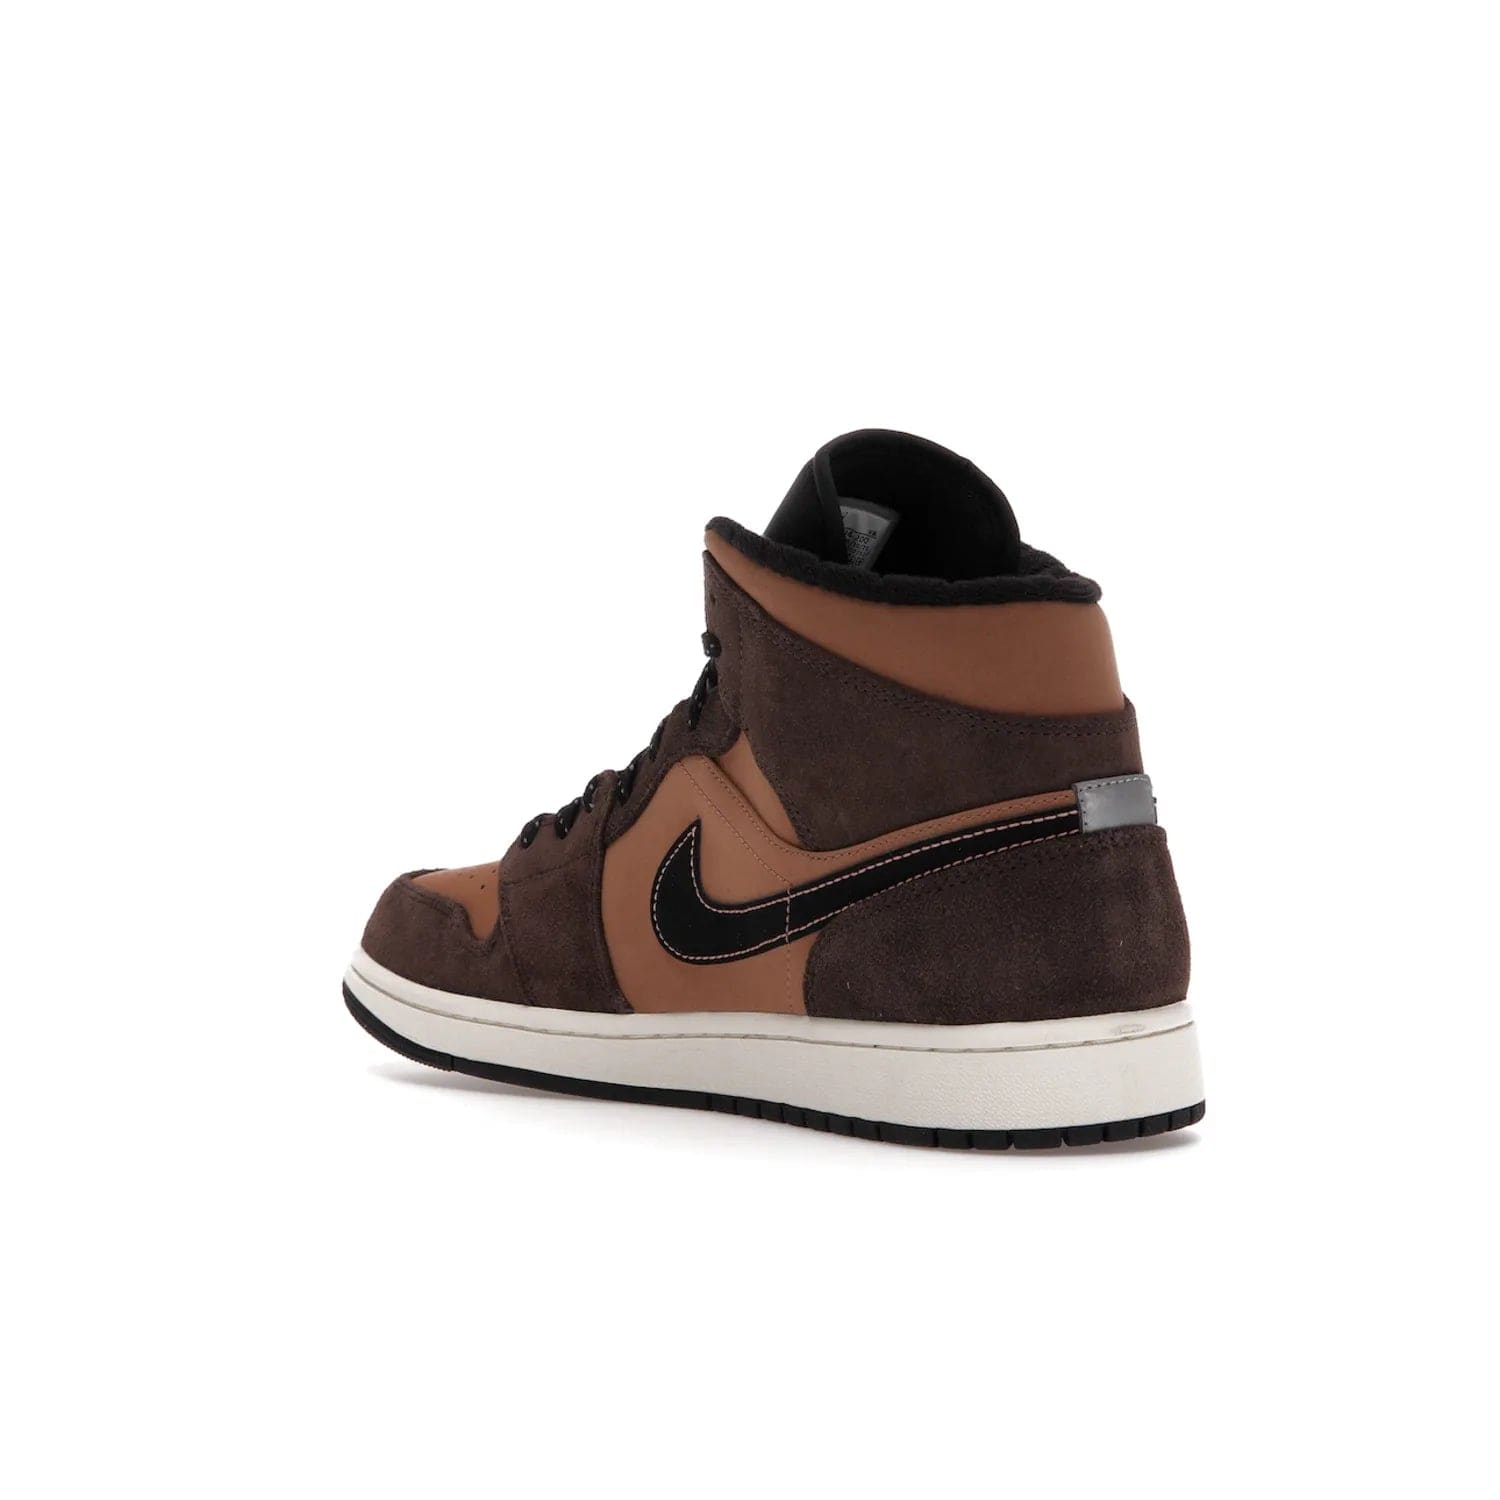 Jordan 1 Mid SE Dark Chocolate - Image 24 - Only at www.BallersClubKickz.com - This fashionable and functional Jordan 1 Mid SE Dark Chocolate features a light brown Durabuck upper, dark brown suede overlays, black Swoosh logos and reflective patch at heel. A must-have for any sneakerhead!